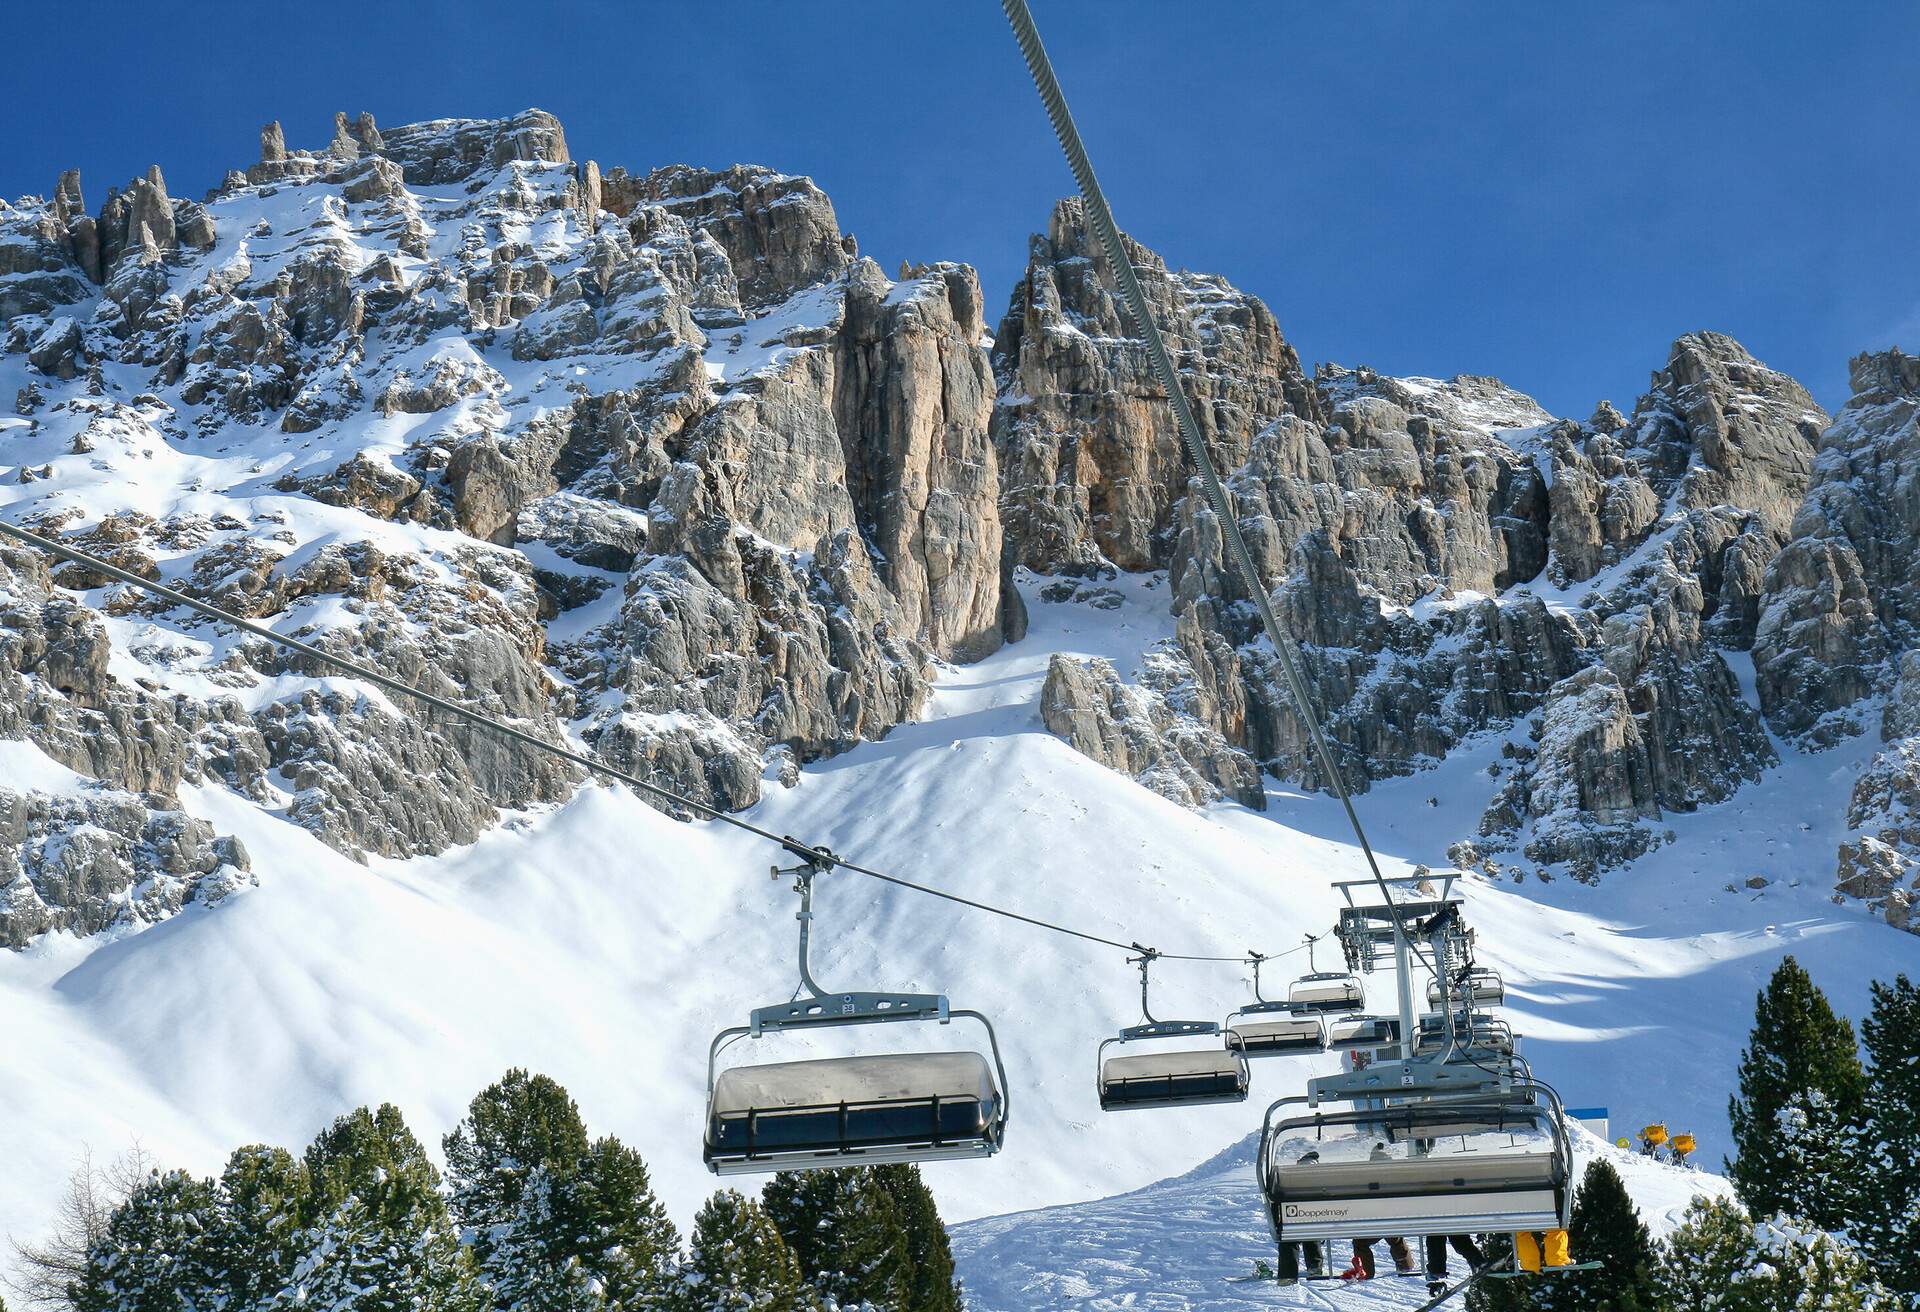 Skiing on the dolomites, Cabs for skiers above the horizon in the background mountains. Val di Fiemme, Italy.